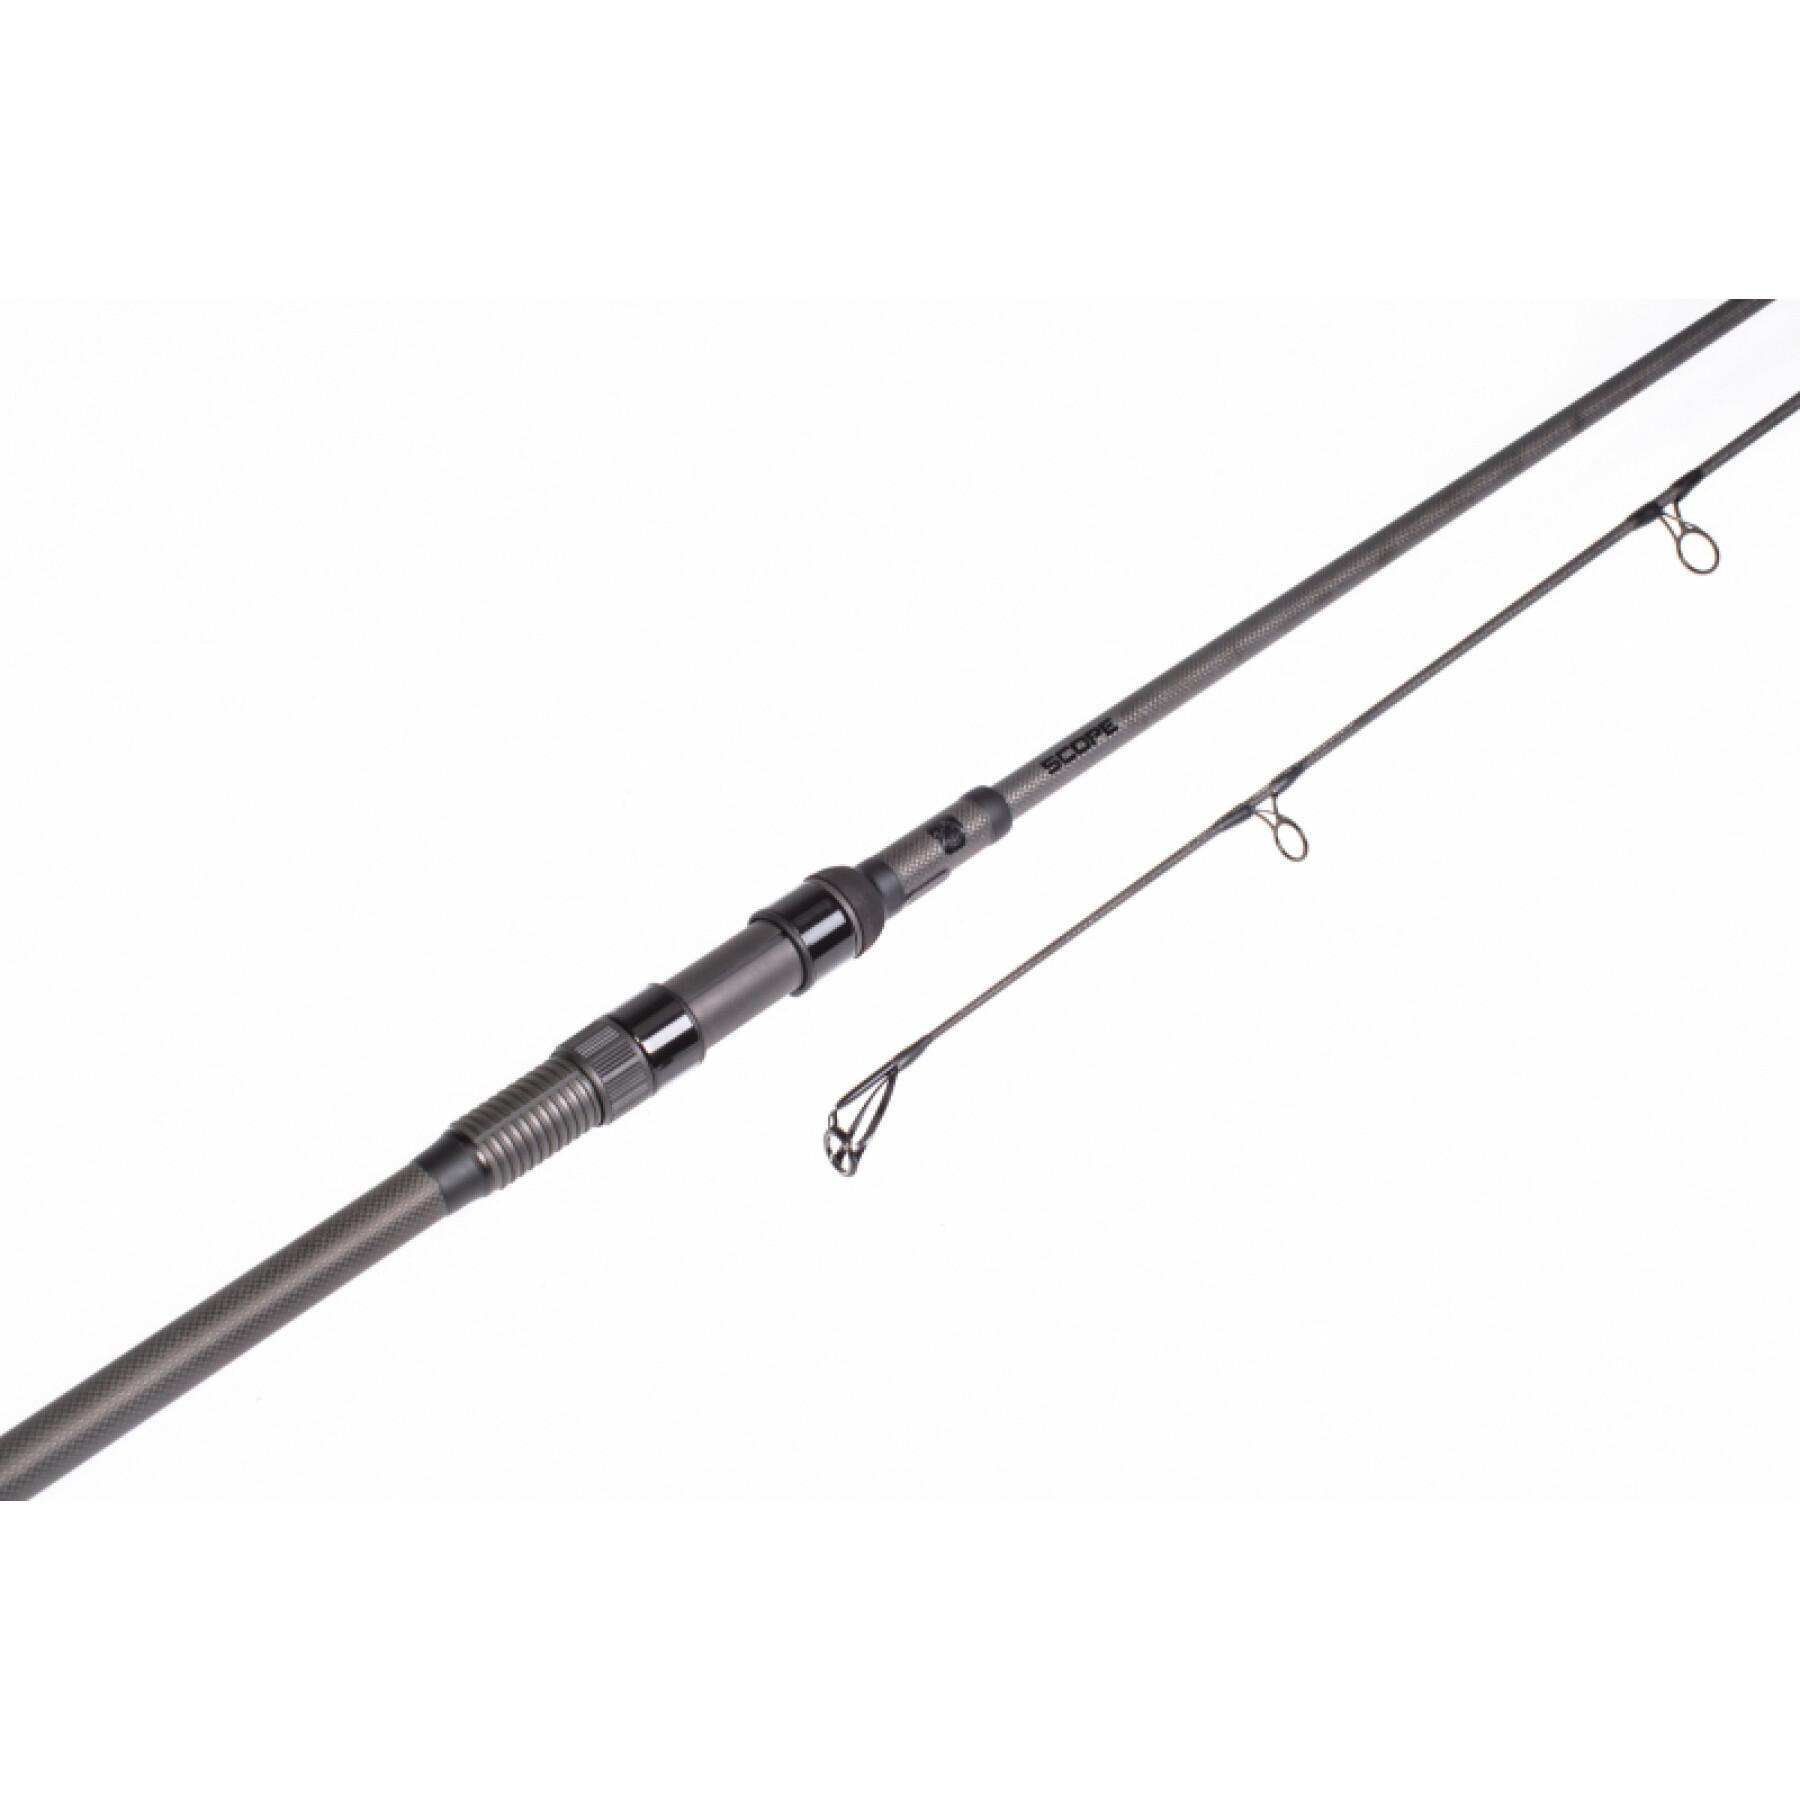 Angelrute Scope Rods Abbreviated 9ft 4.5lb